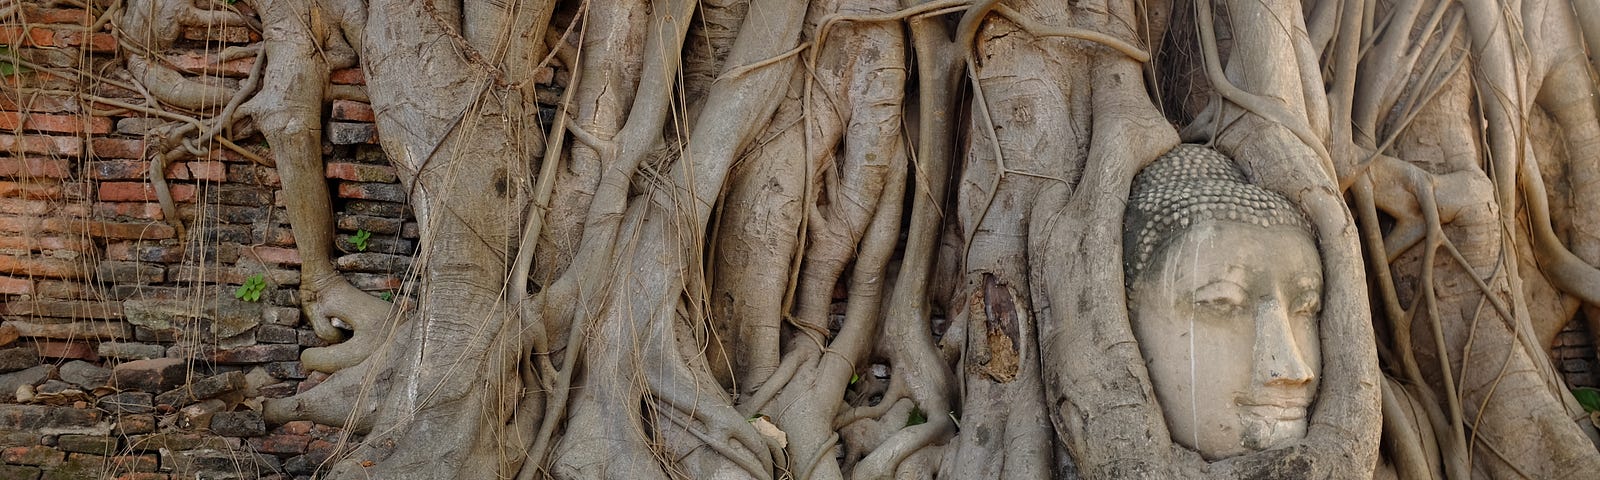 a Buddha face in a mass of tree roots or branches